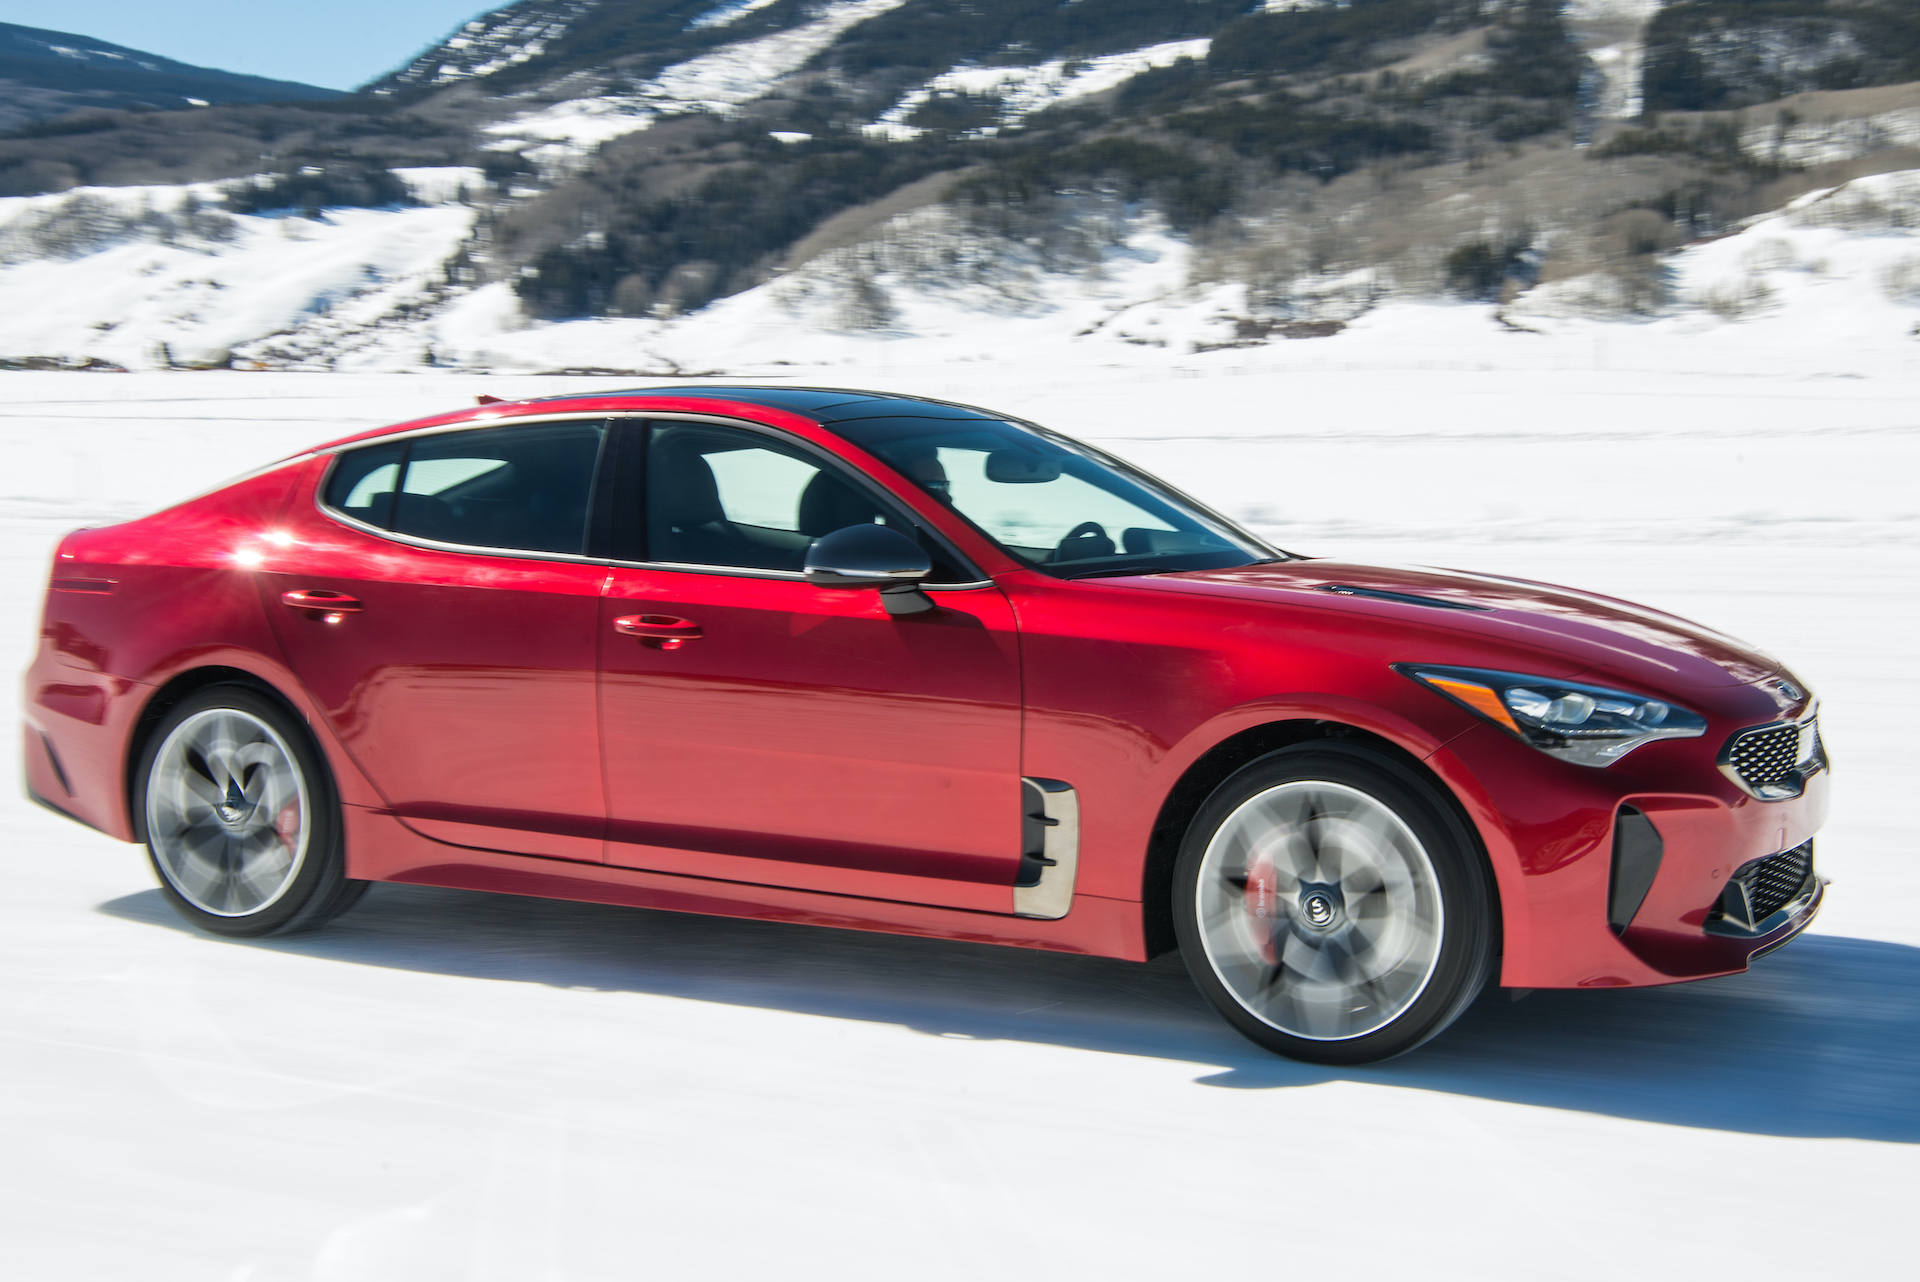 New And Used Kia Stinger Prices Photos Reviews Specs The Car